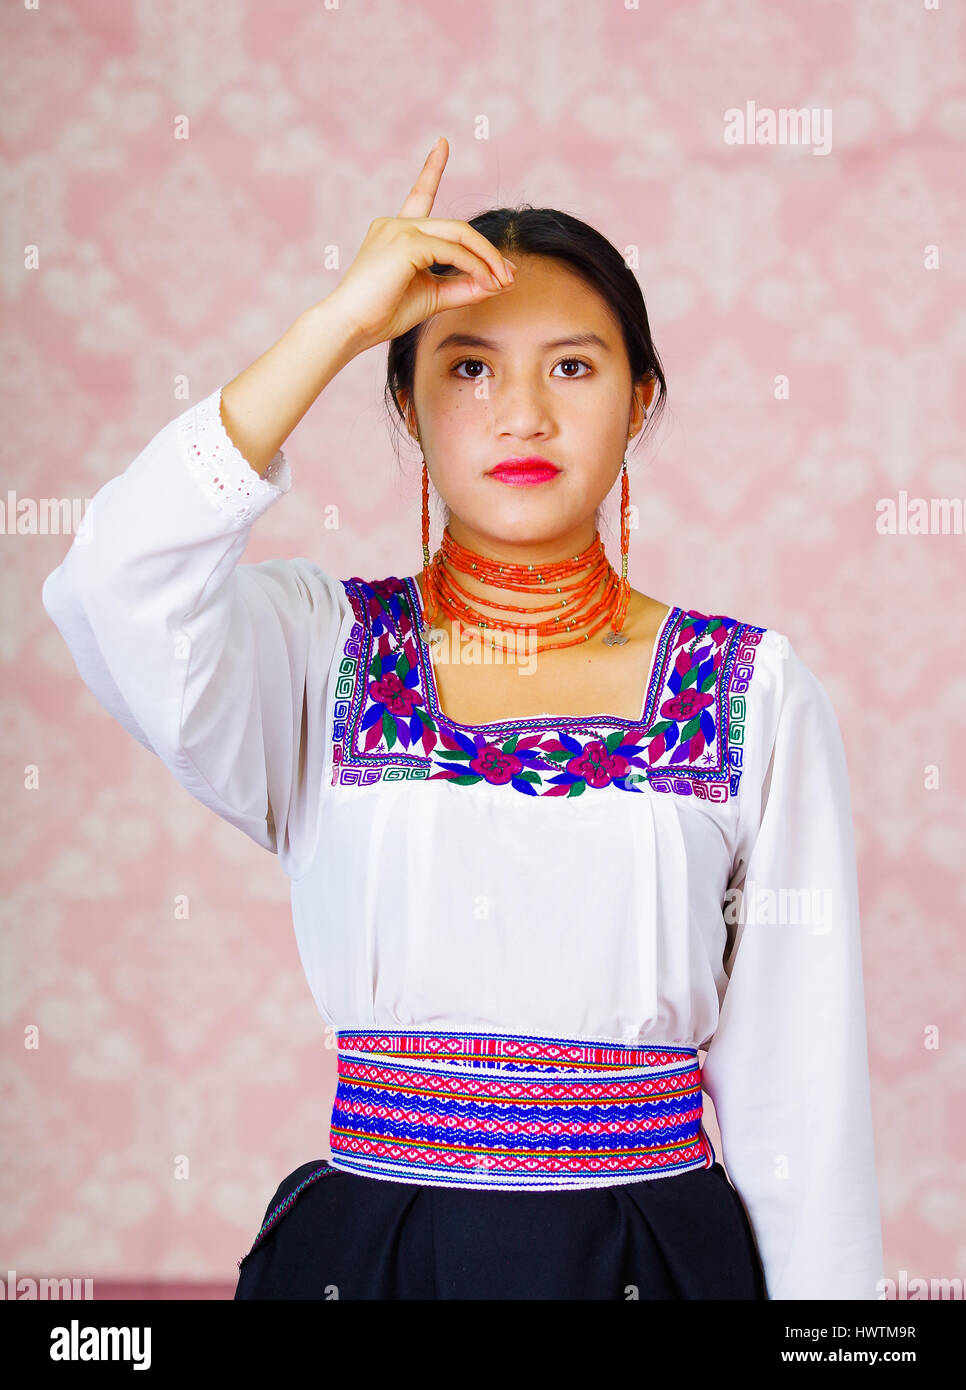 young-woman-wearing-traditional-andean-dress-facing-camera-doing-sign